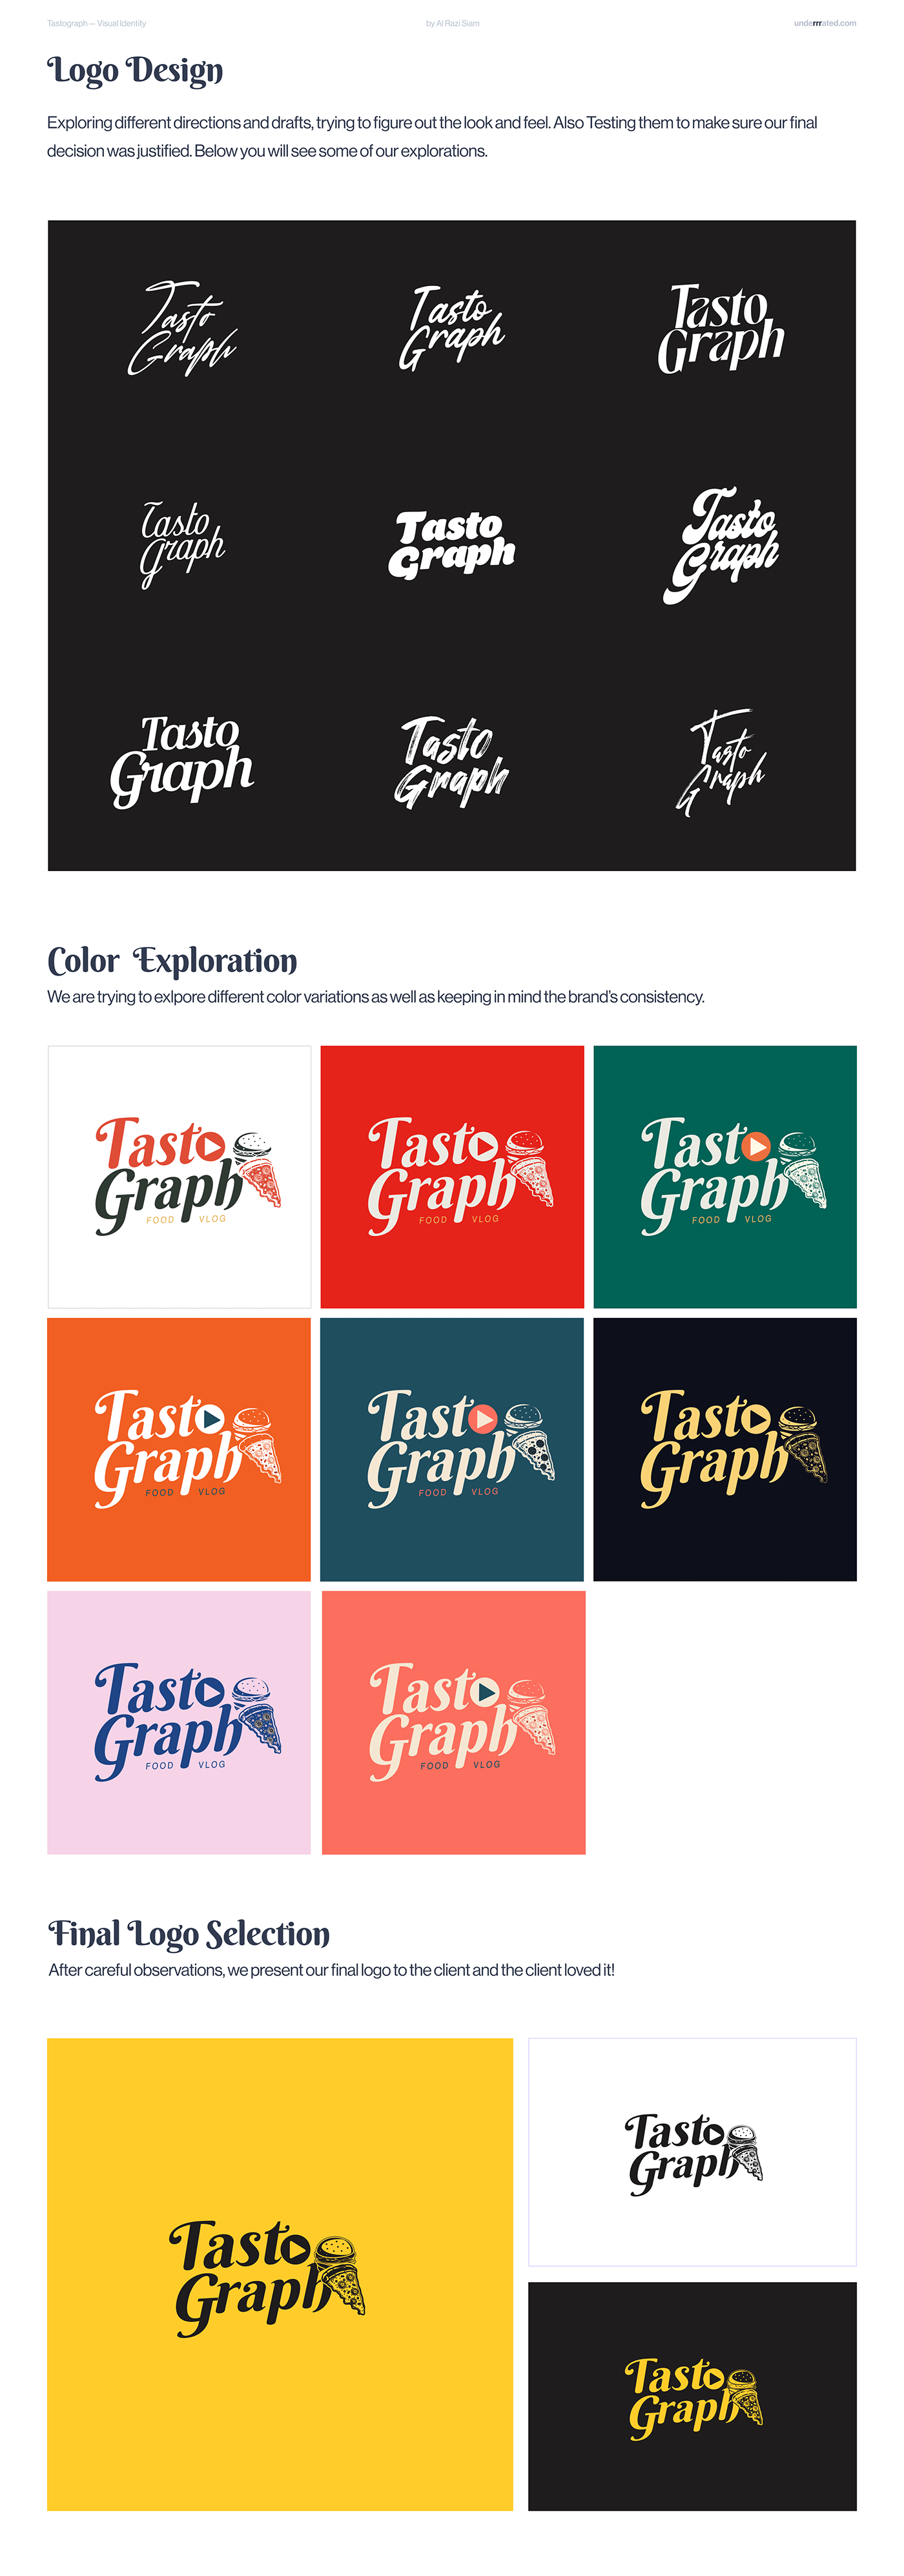 Exploration of logo with color and different typeface